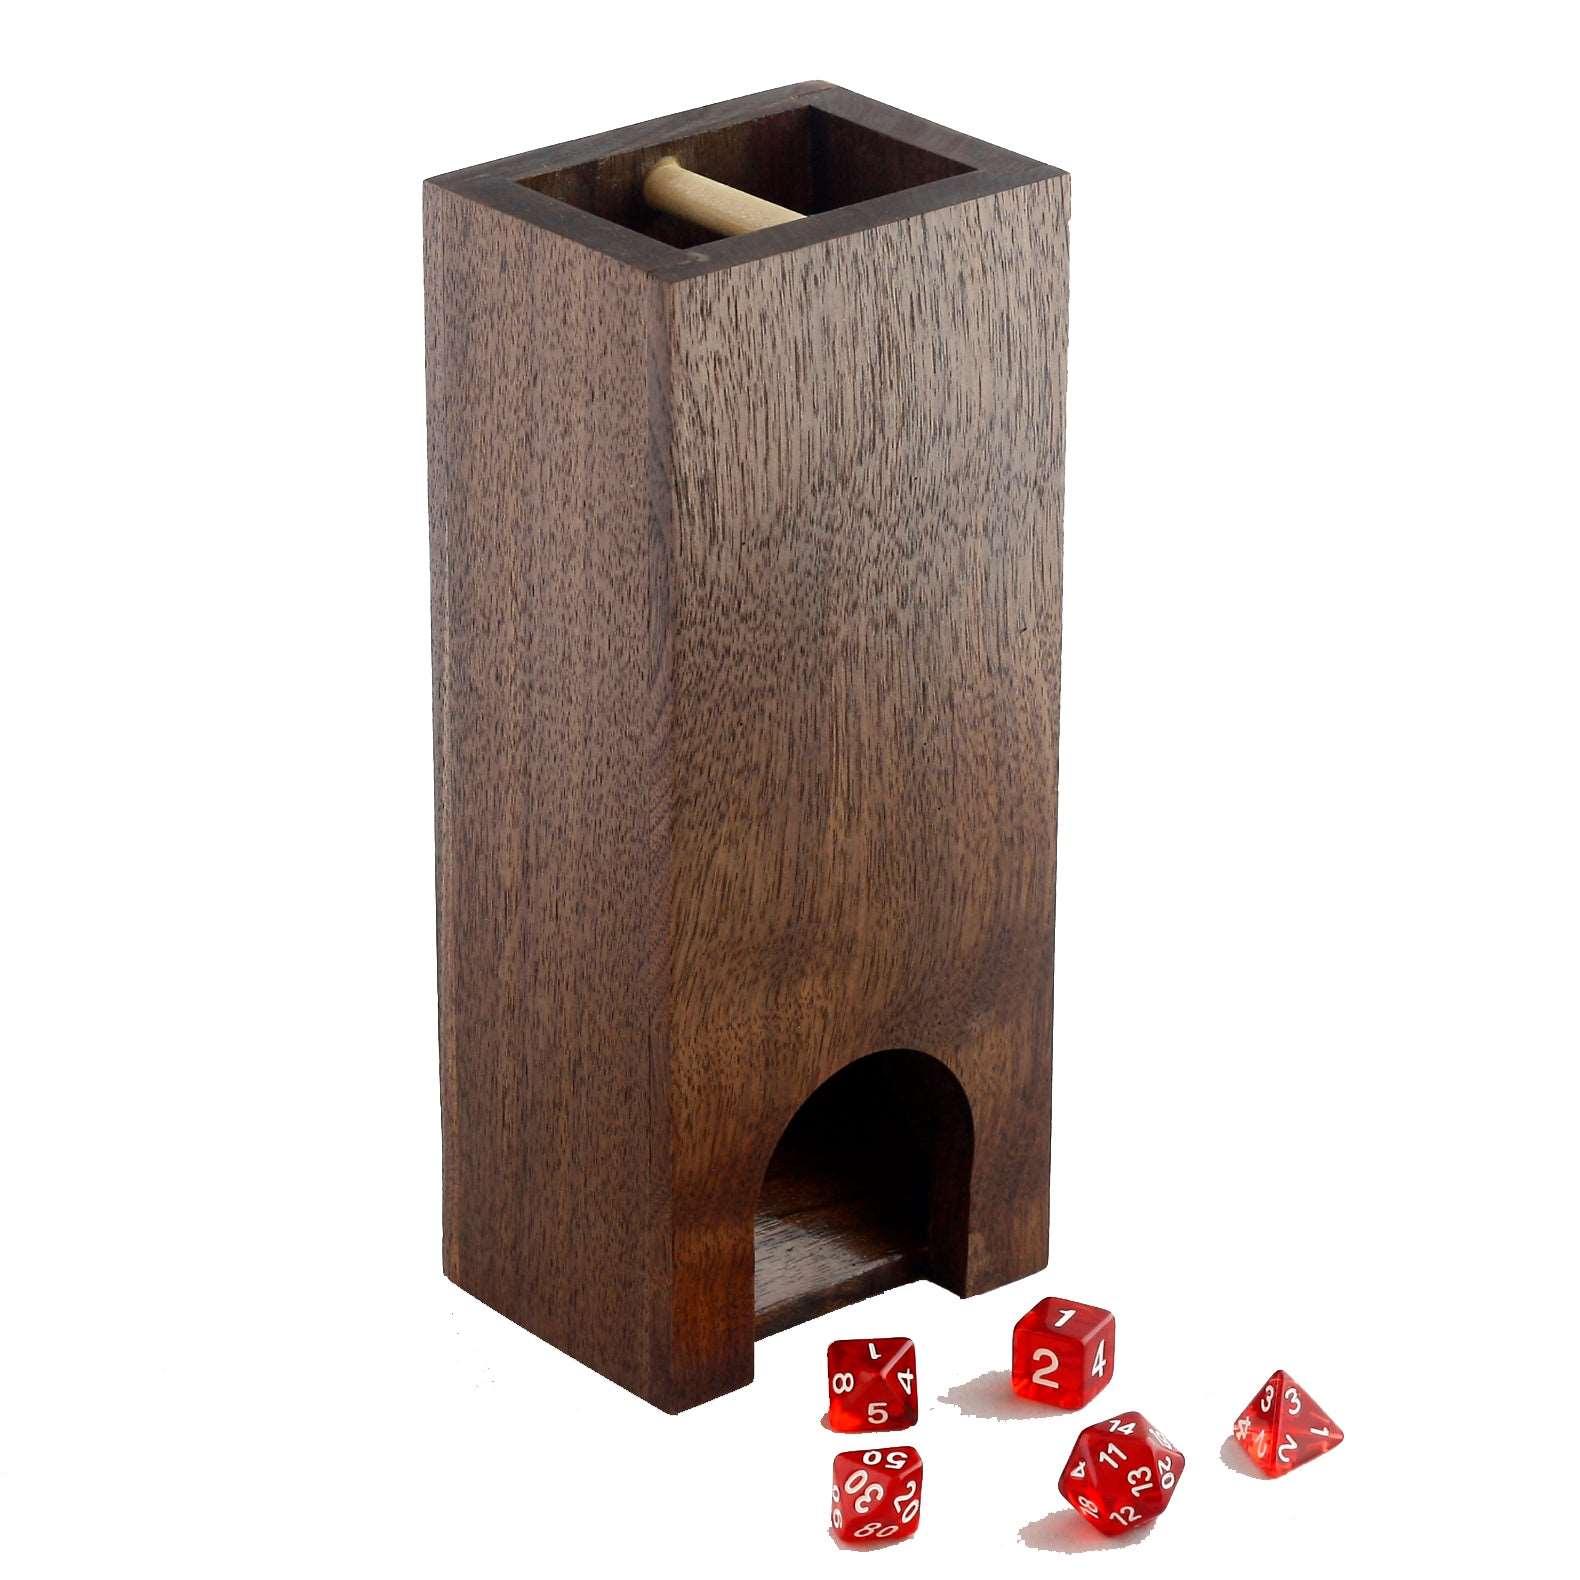 Premium hardwood dice tower made from all walnut.